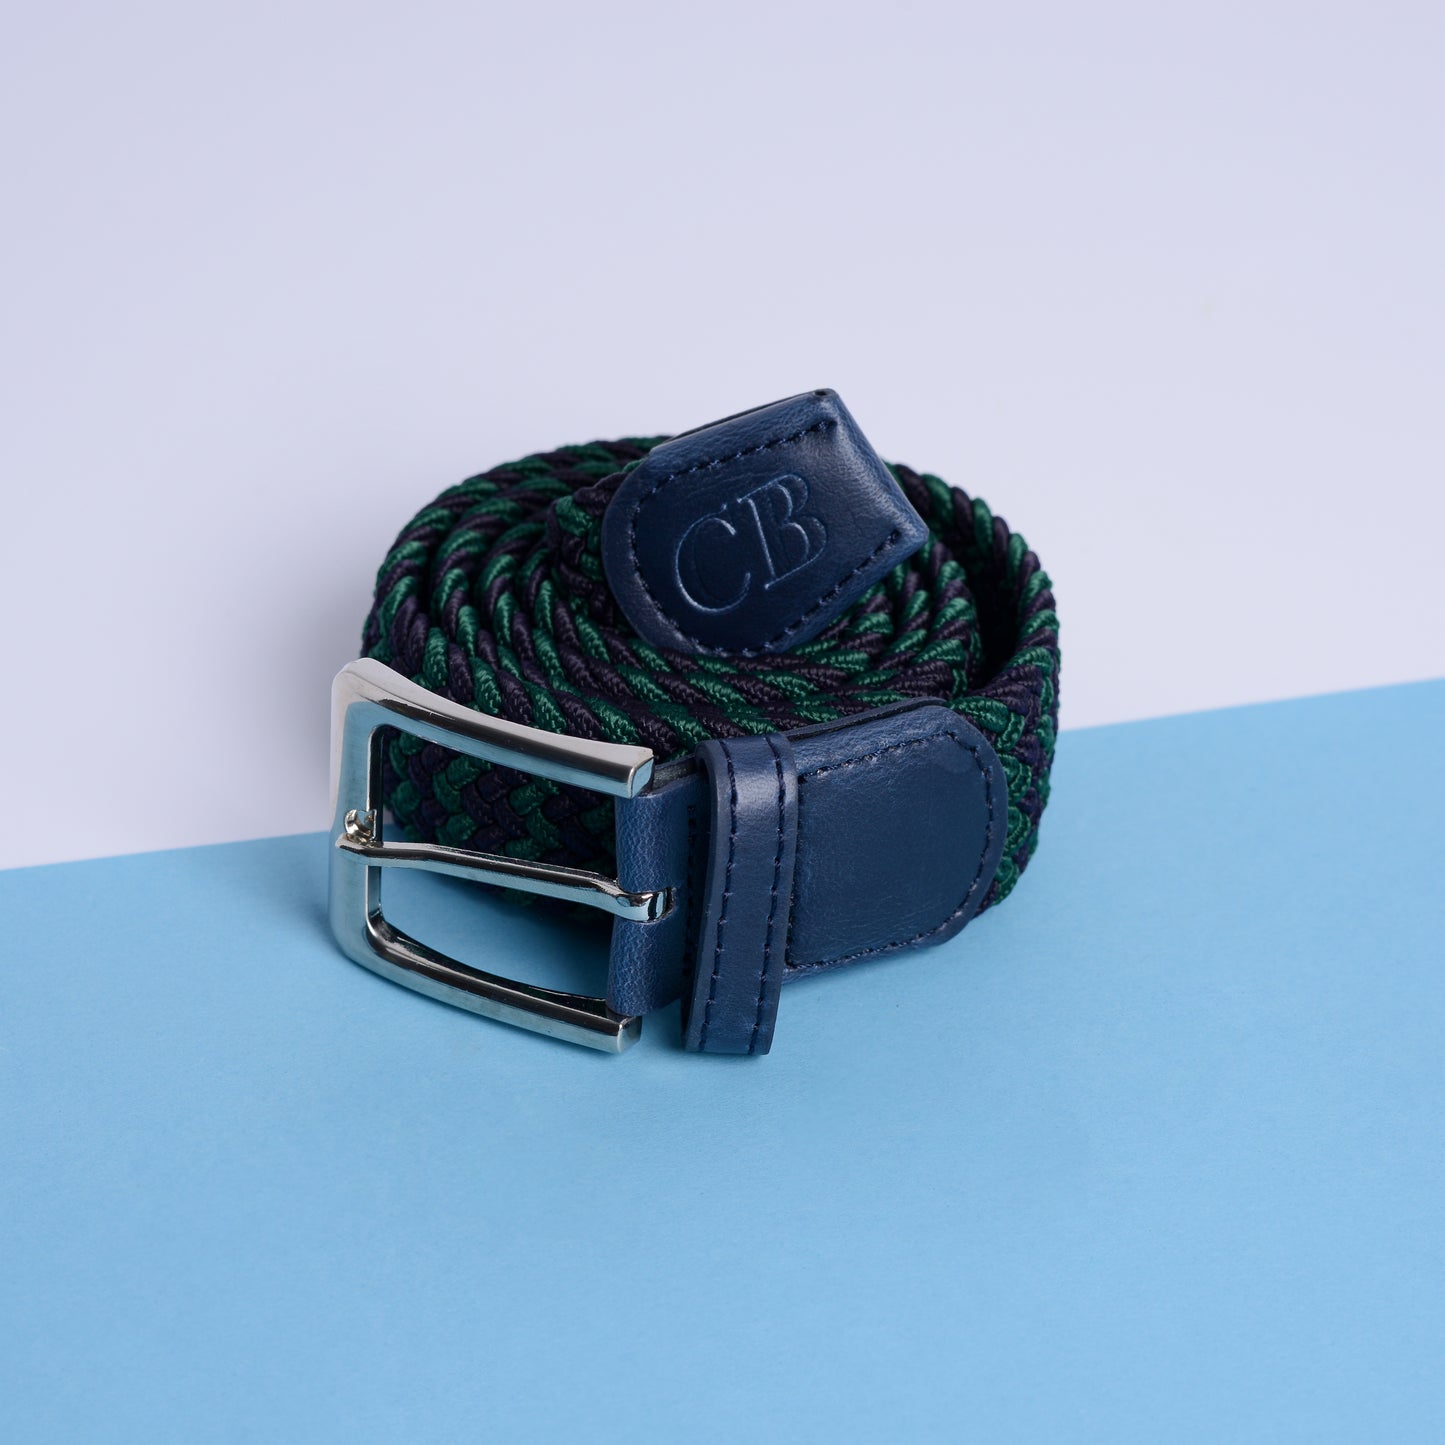 Men's Stretch Woven Belt in Navy and Green Zigzag